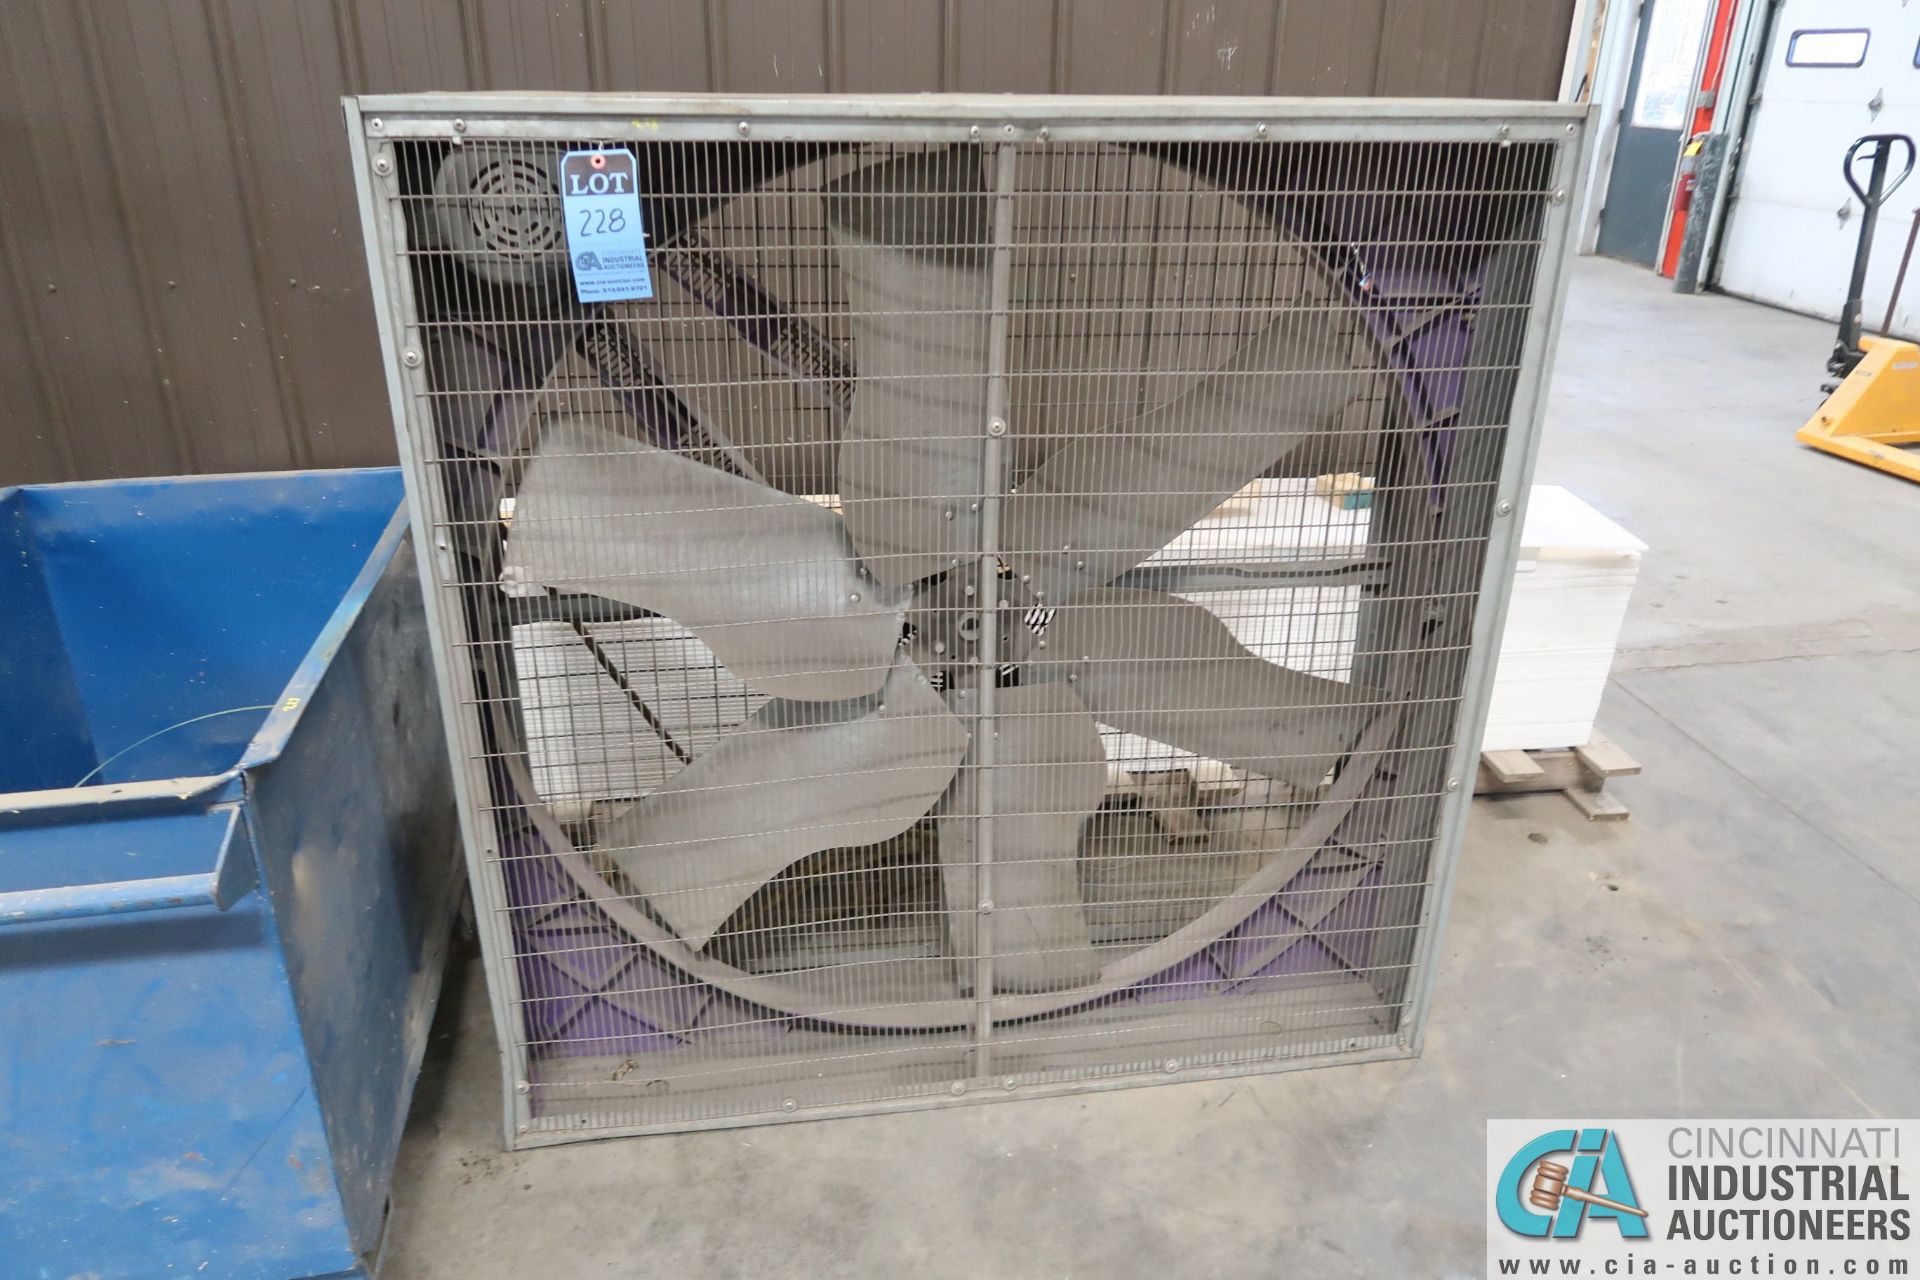 (LOT) 48" BOX FAN, STEEL CONTAINER AND SKID OF 15" WIDE PLASTIC SHEET - Image 2 of 4